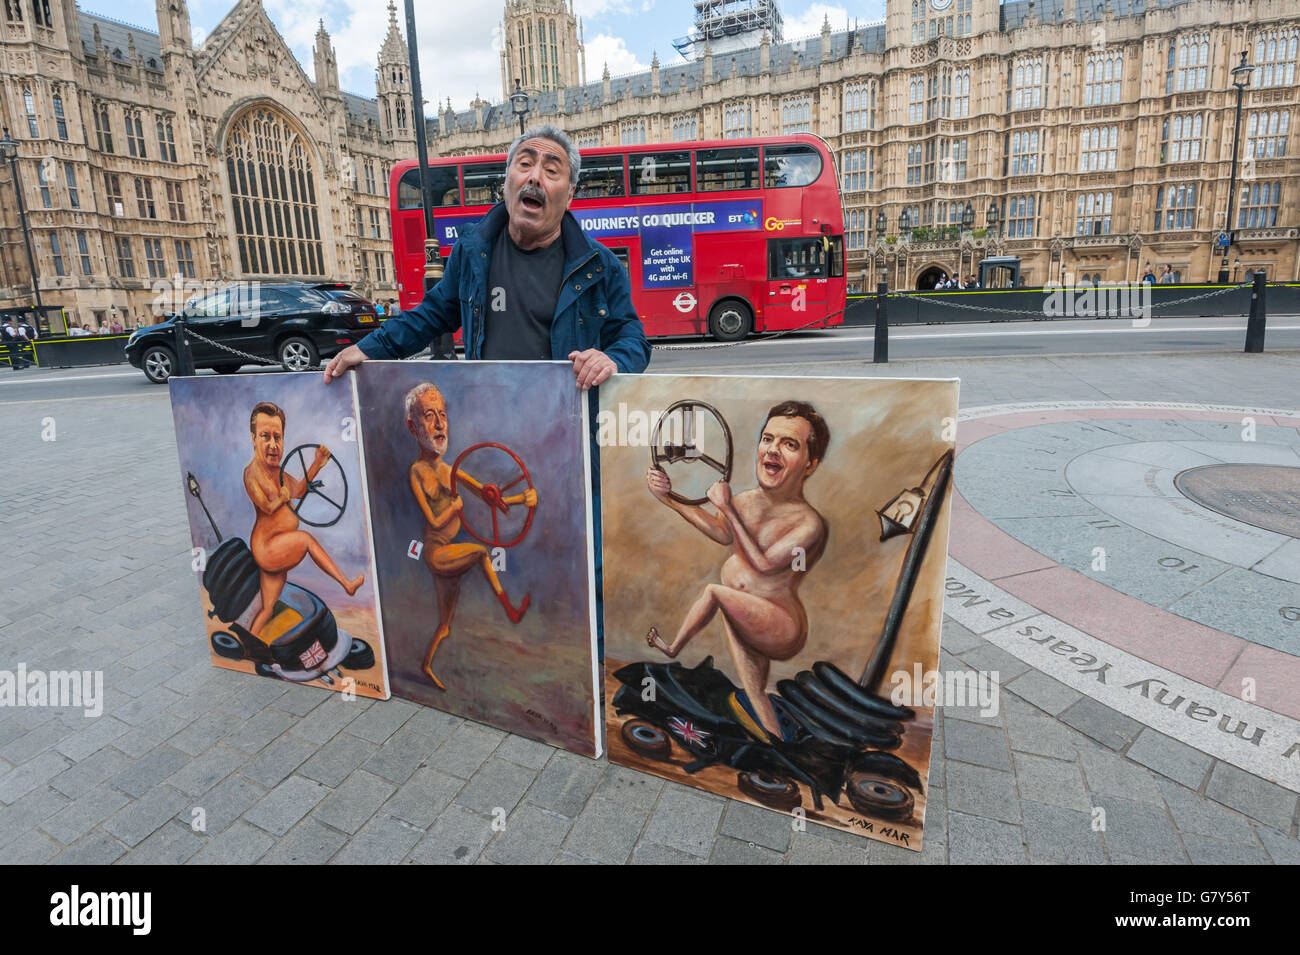 London, UK. 27th June 2016.  Political artist Kaya Mar poses with three paintings showing David Cameron, Jeremy Corbyn and George Osborne after Brexit. Cameron and Osborne hold unattached steering wheels as they step out of the wreckage, while Corbyn prances along with an L sign. Peter Marshall/Alamy Live News Stock Photo